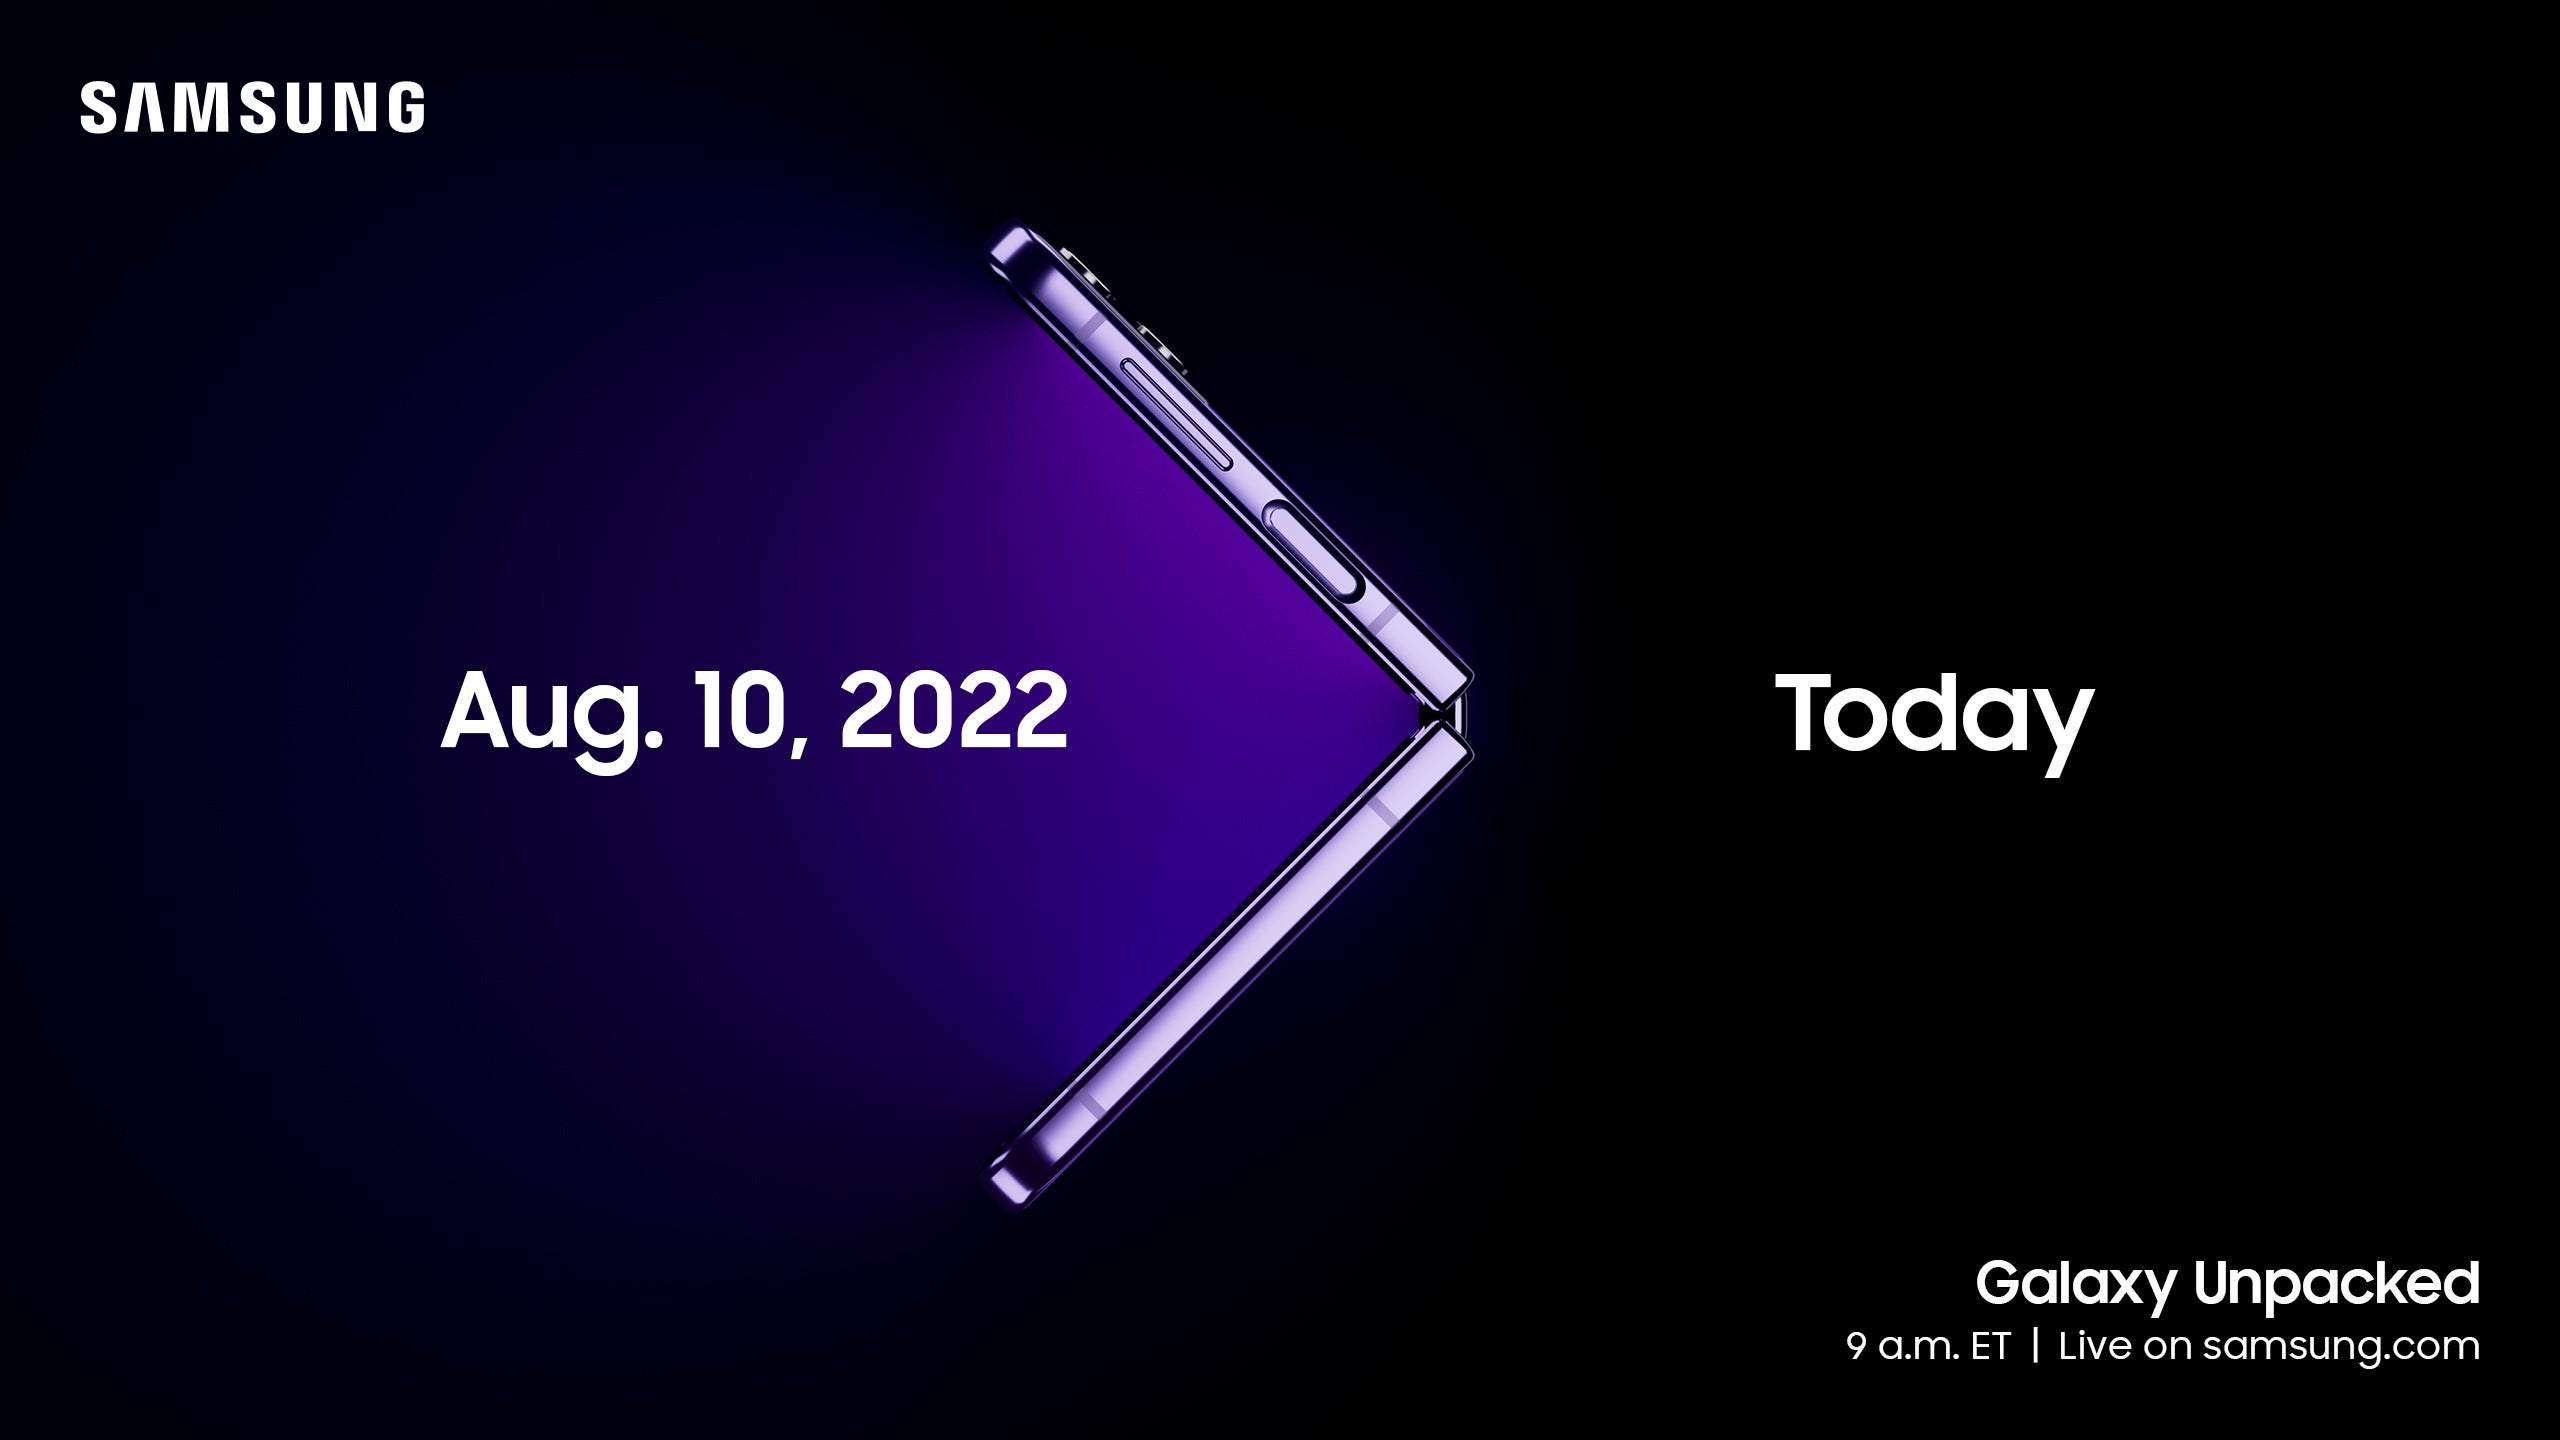 Samsung's Galaxy Unpacked event is taking place live at 9 a.m. E.T. on Aug. 10.  (Image: Samsung)